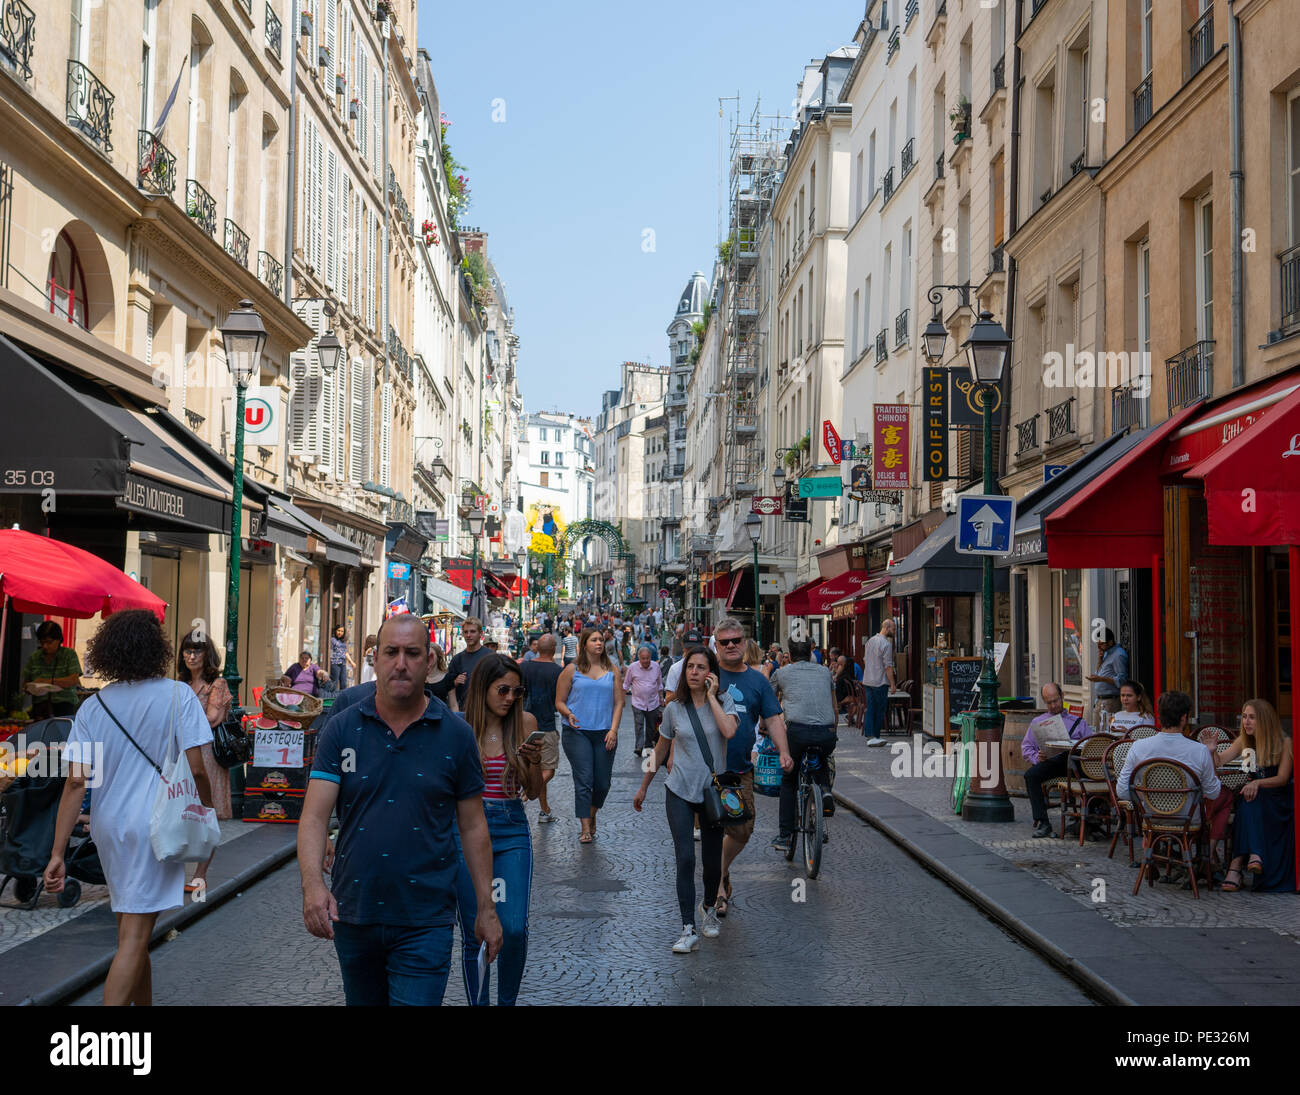 Paris France, 14 July 2018: Rue Montorgueil pedestrian street view in Paris France during summer with tourists and parisian people Stock Photo